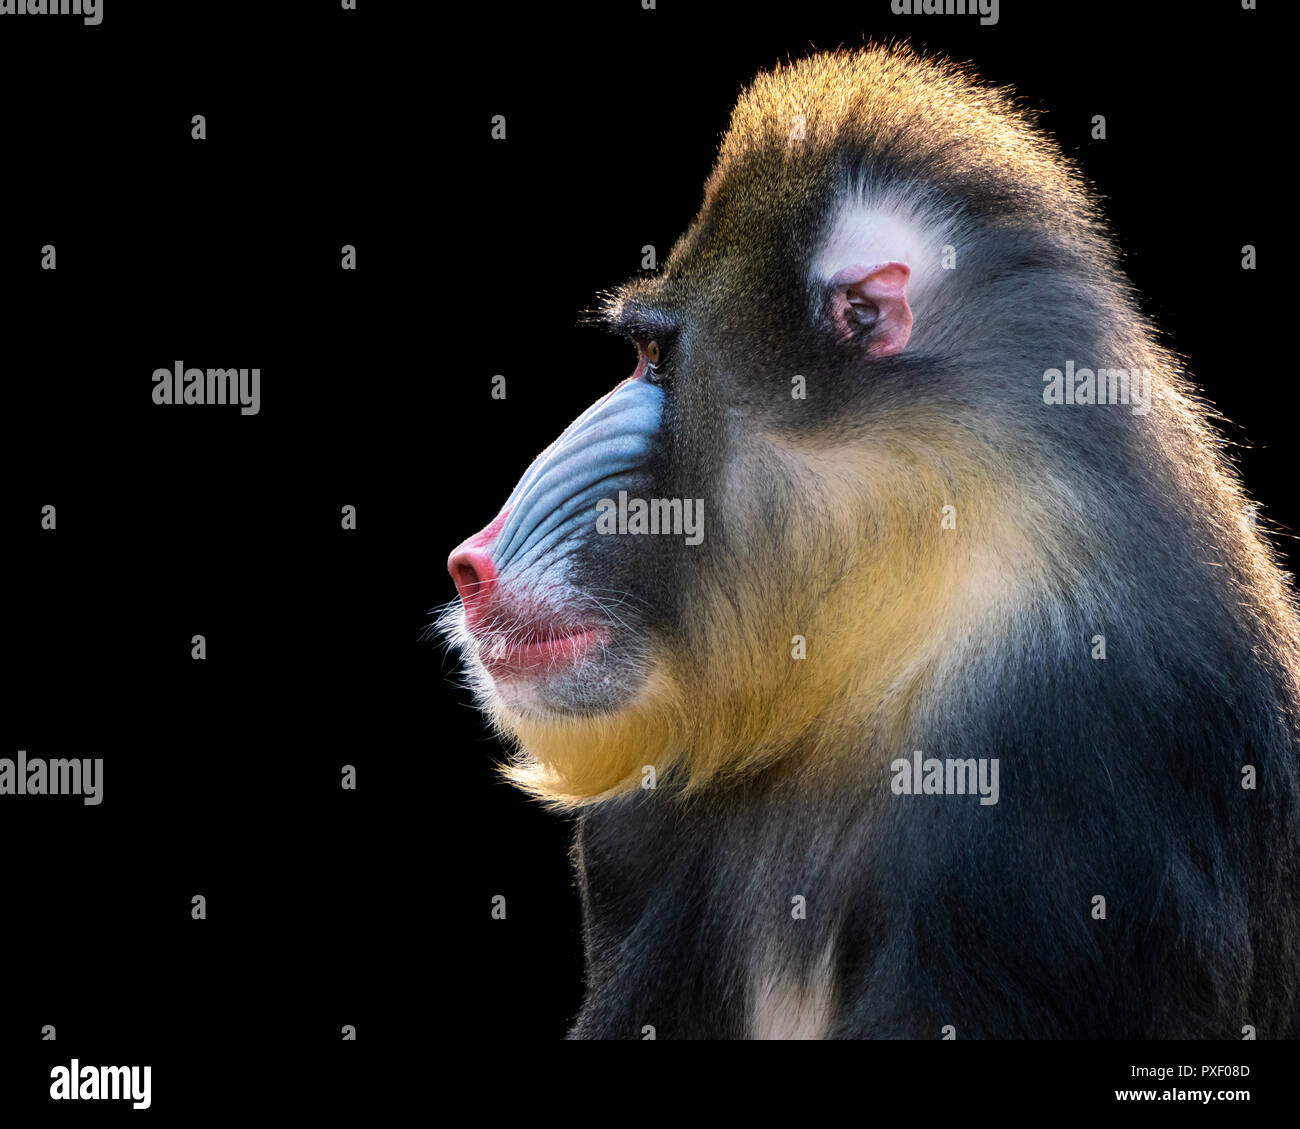 Profile Portrait of a Backlit Mandrill Against a Black Background Stock Photo